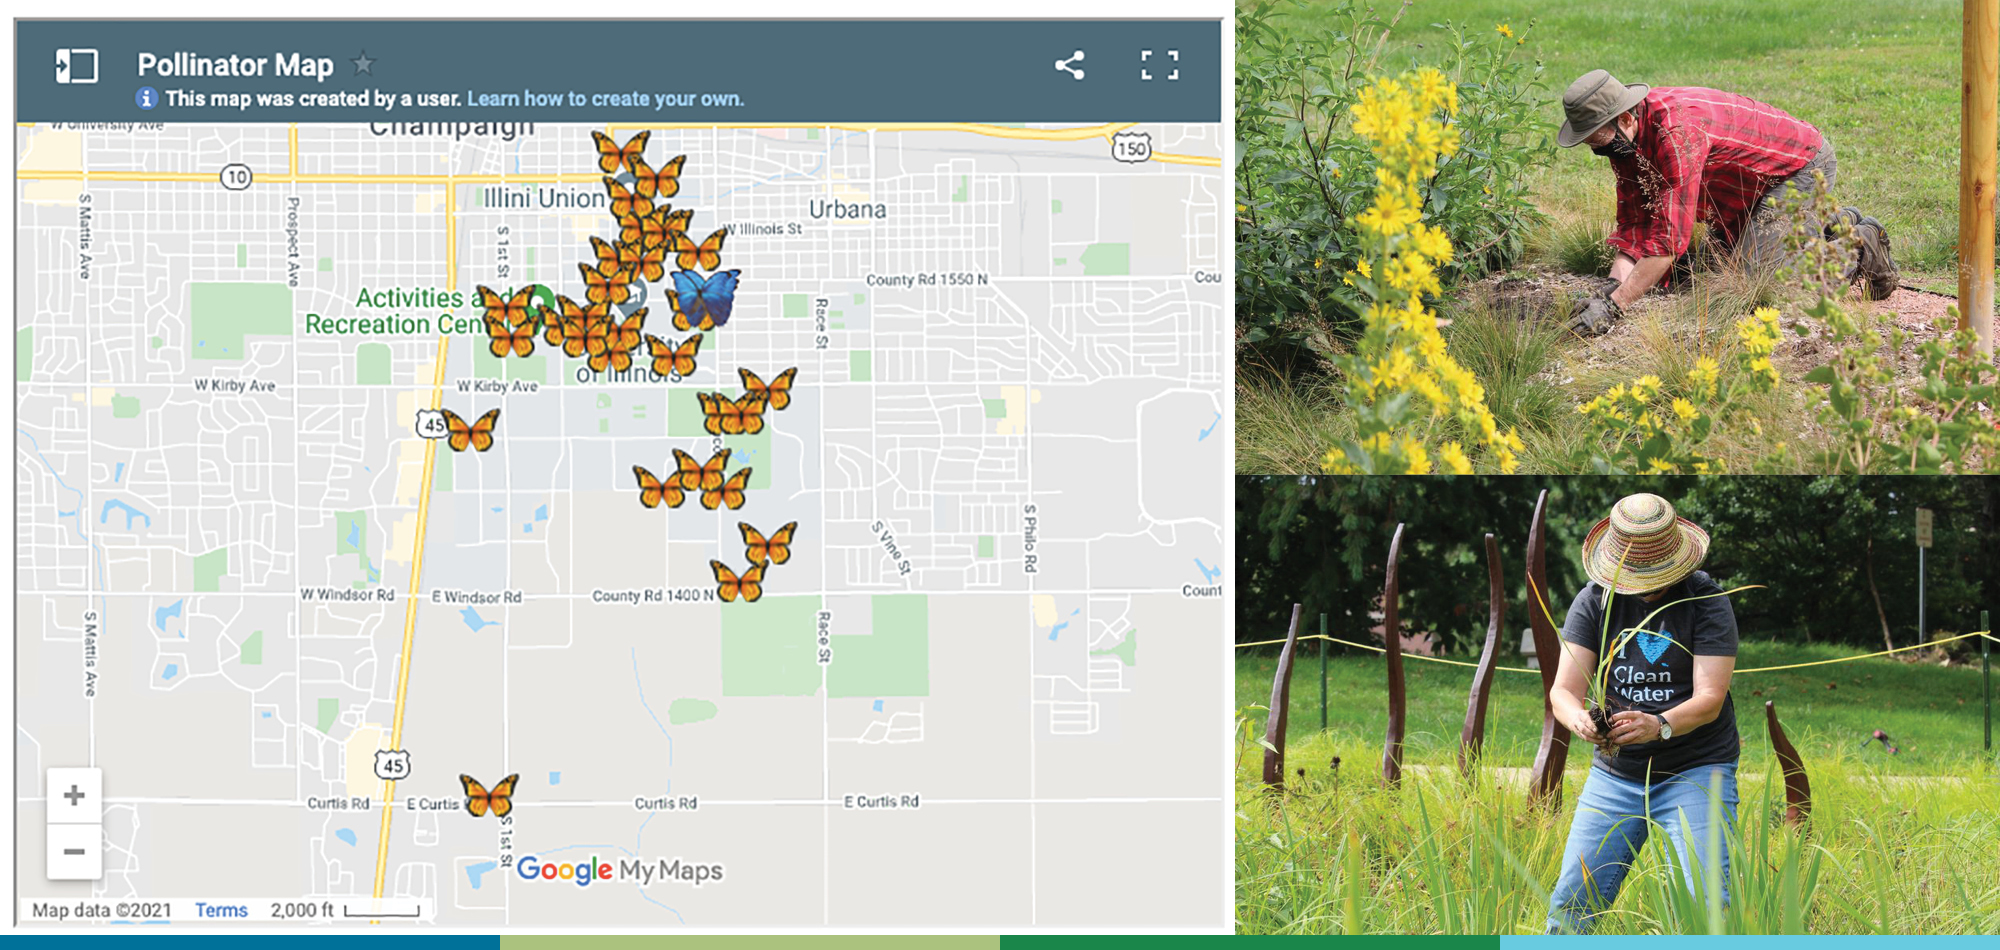 A composite image: On the left is a map showing locations of pollinator gardens on a college campus. On the right are two photos showing a man and a woman working to plant pollinator flowers